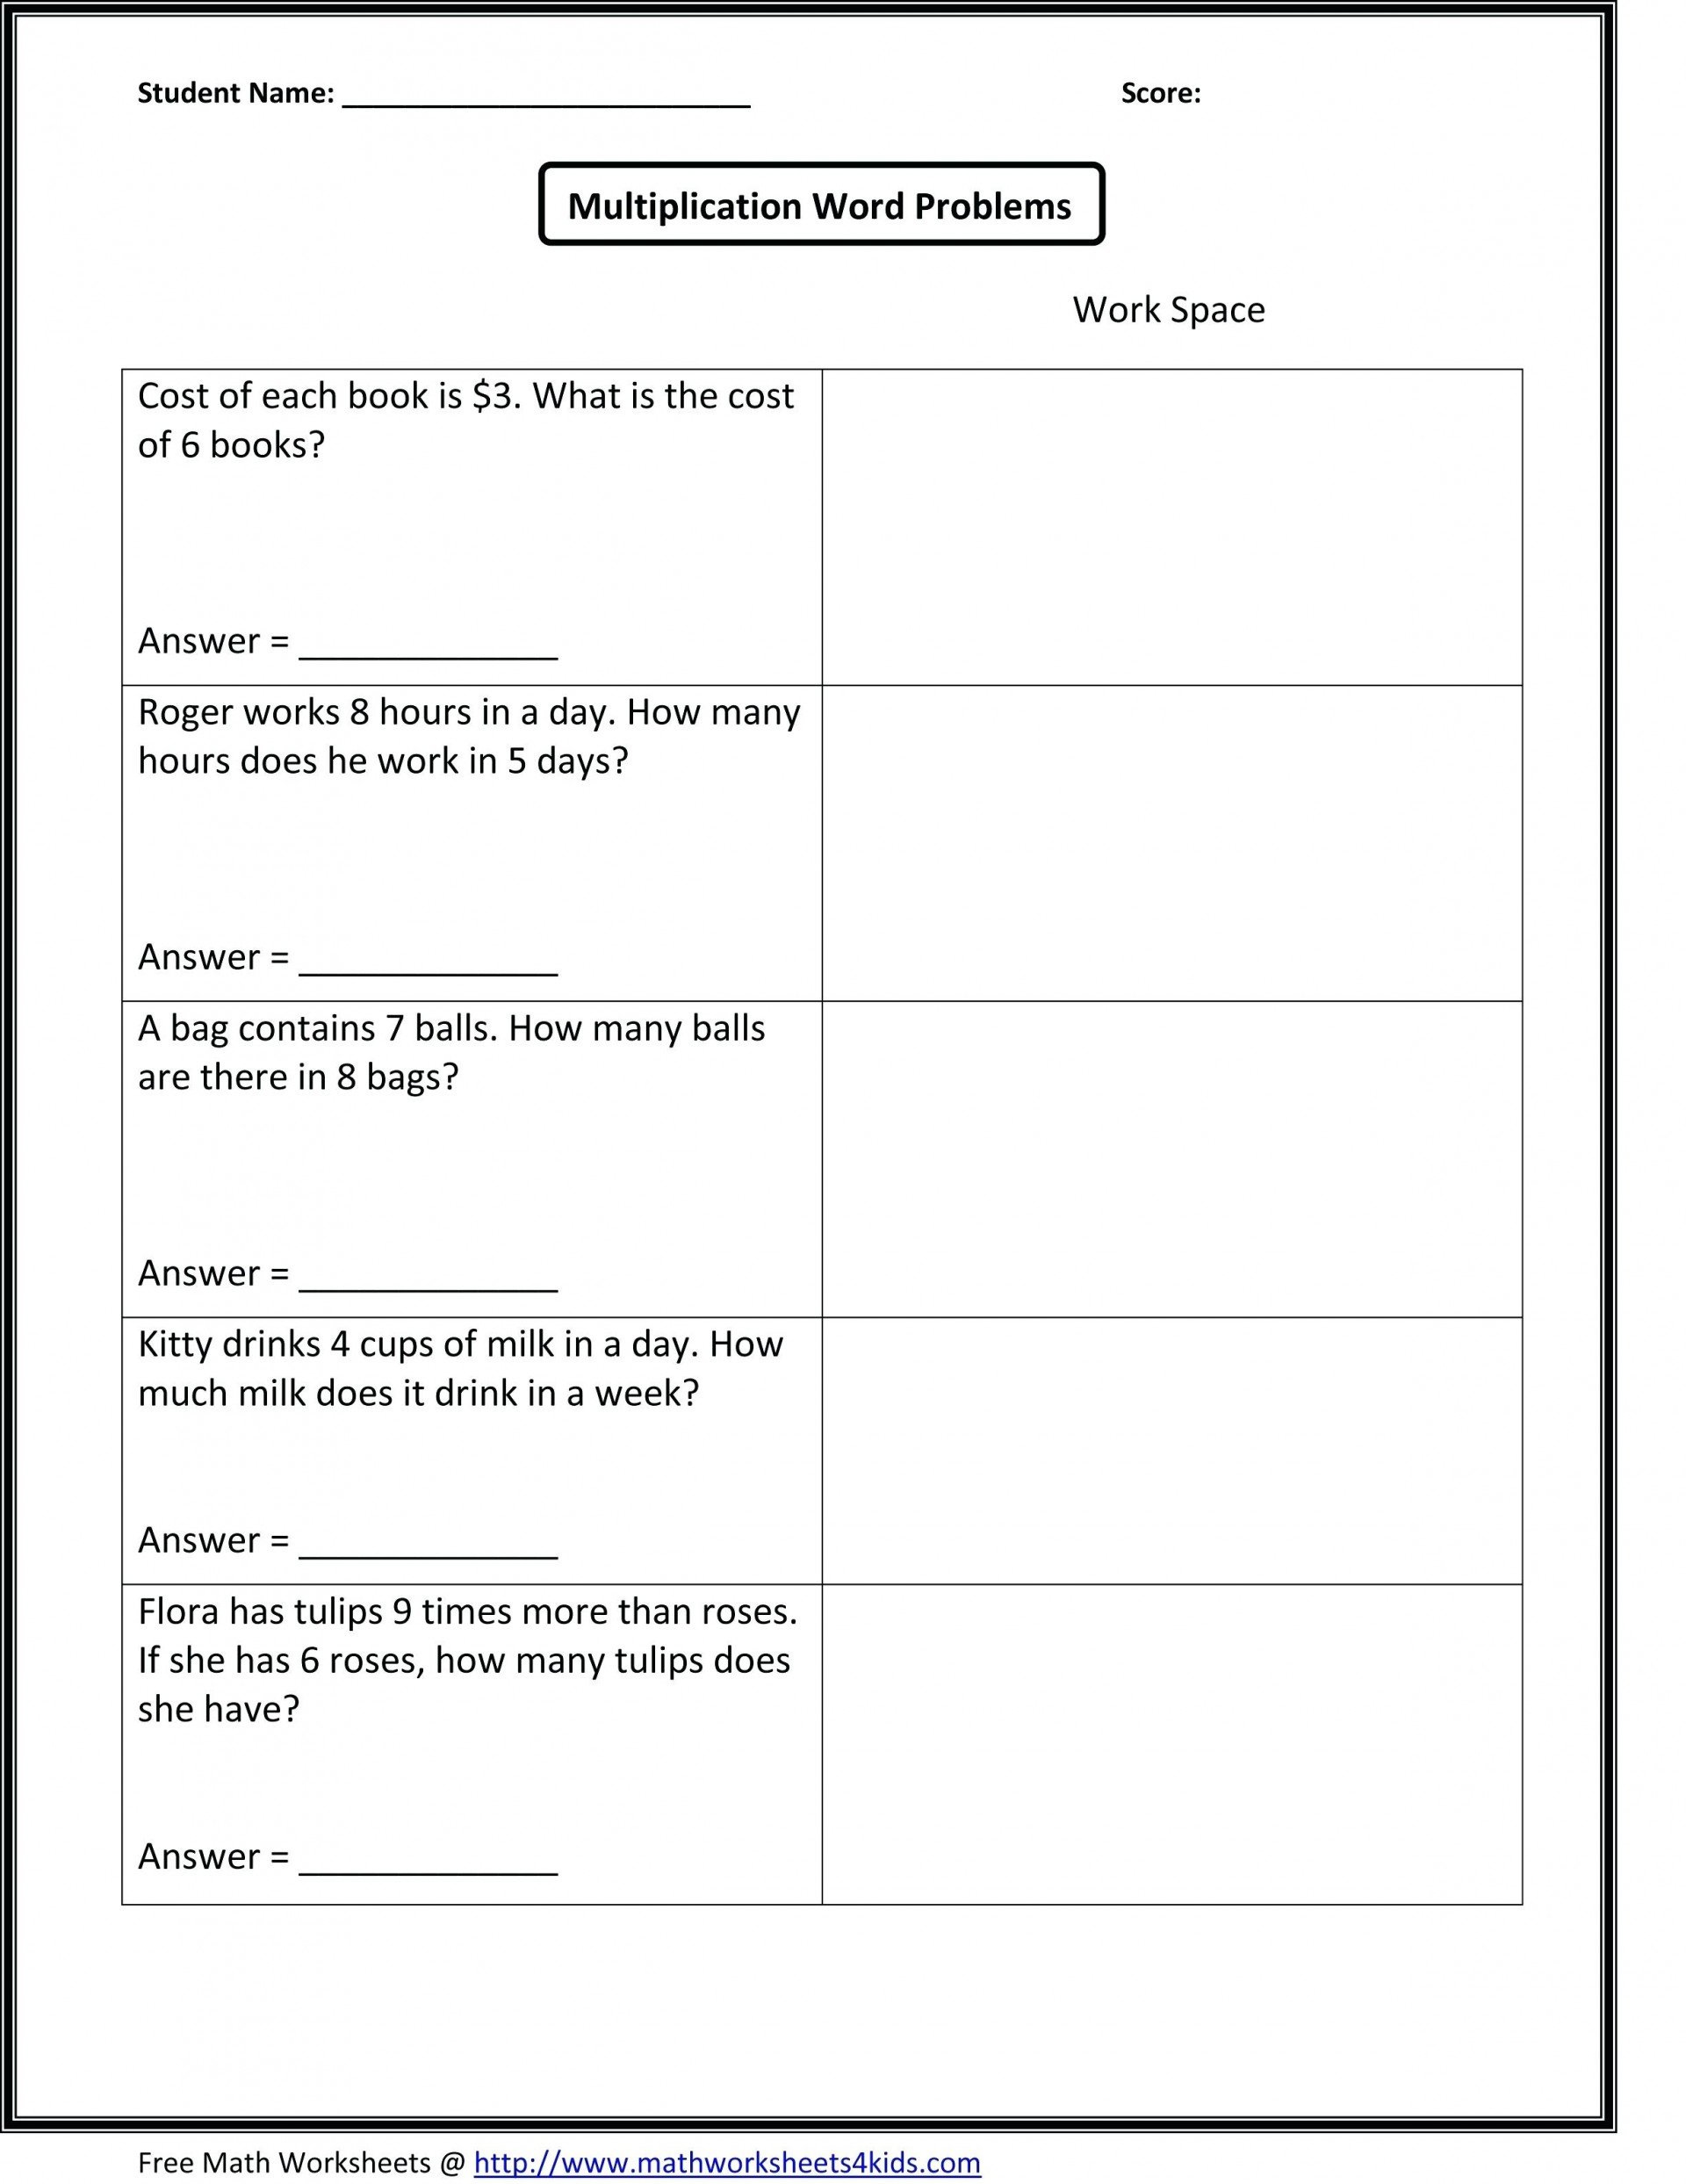 001 Printable Multi Step Word Problems Exceptional Free 4Th Grade Together With Dividing Fractions Word Problems 6Th Grade Worksheets